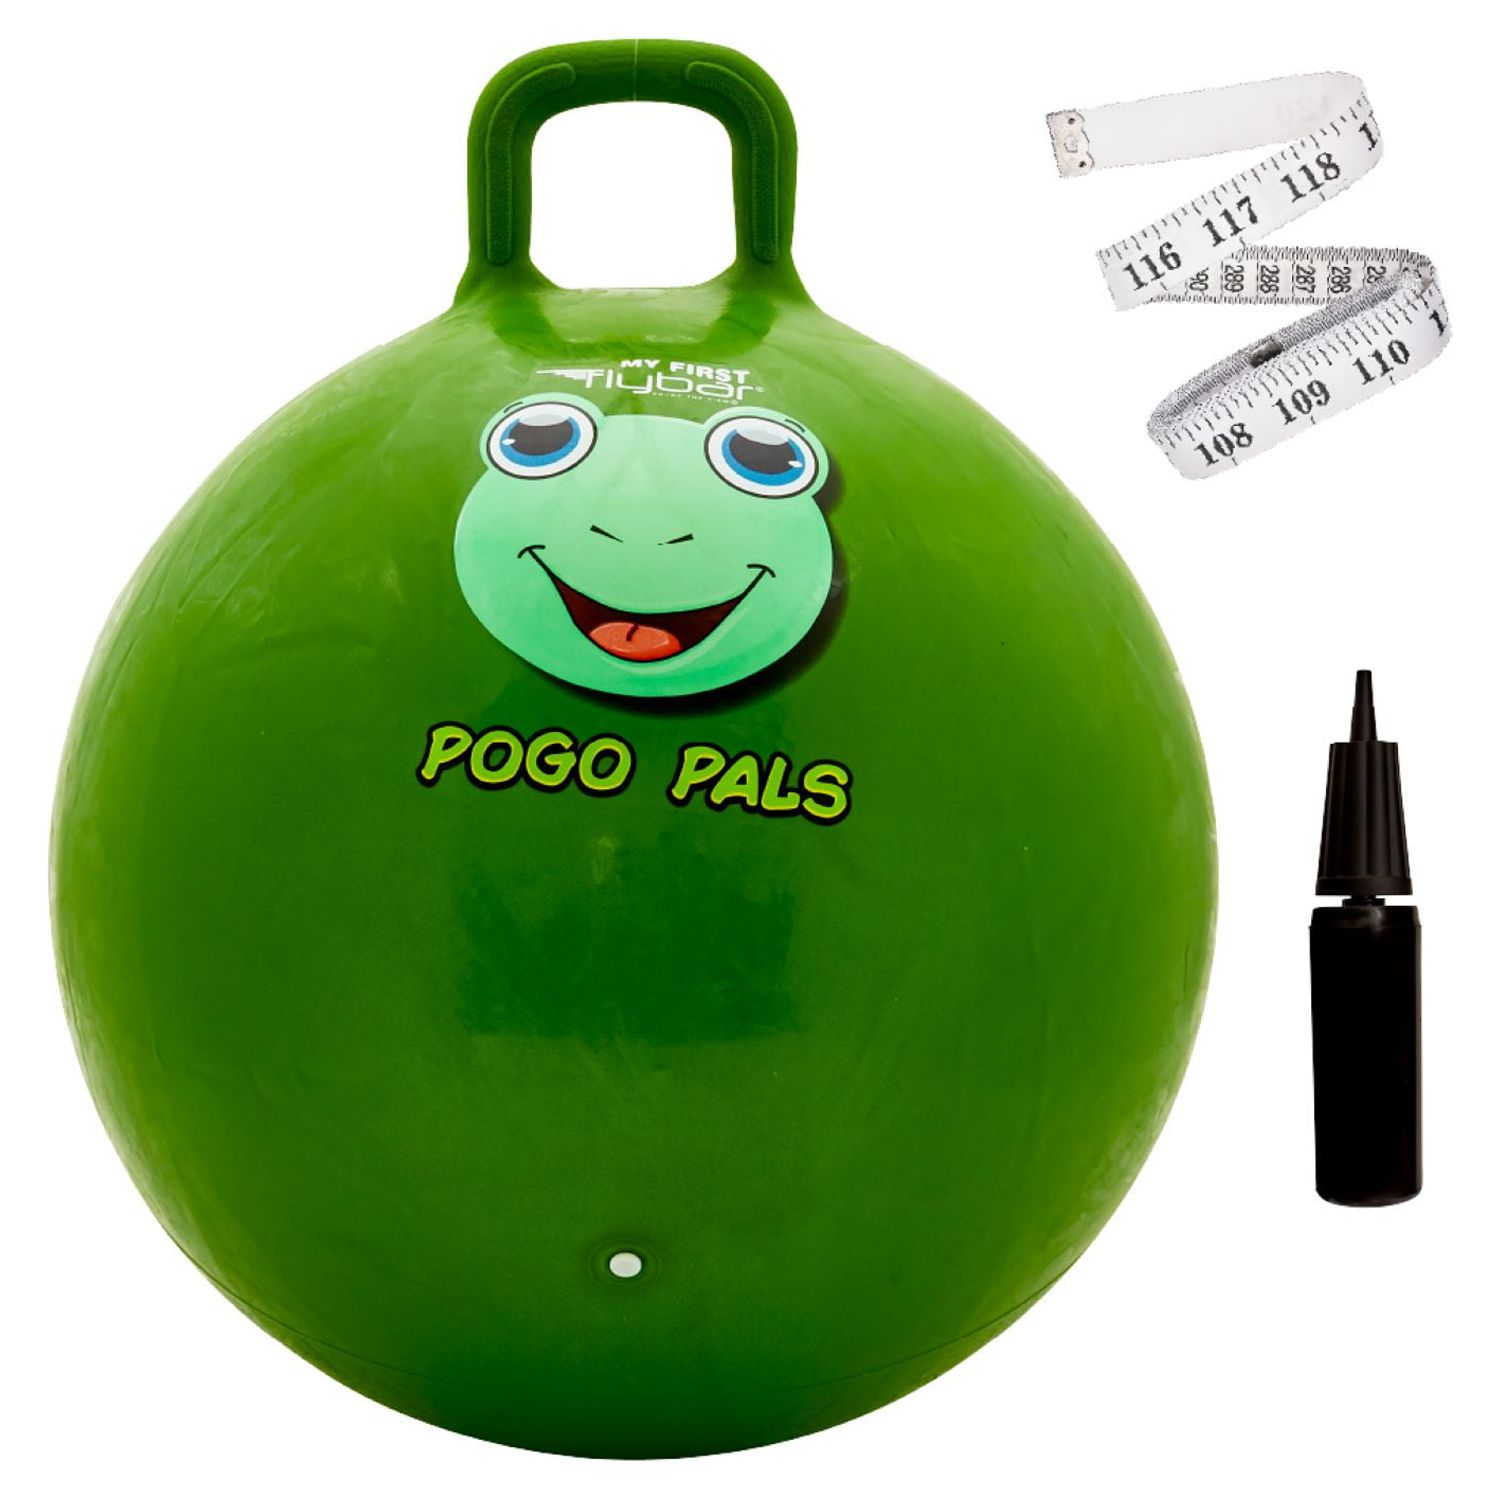 Flybar Hopper Ball for Kids - Bouncy Ball with Handle, Durable Bouncy Balls, 125lbs, Ages 3+, Green Frog, M - image 1 of 6